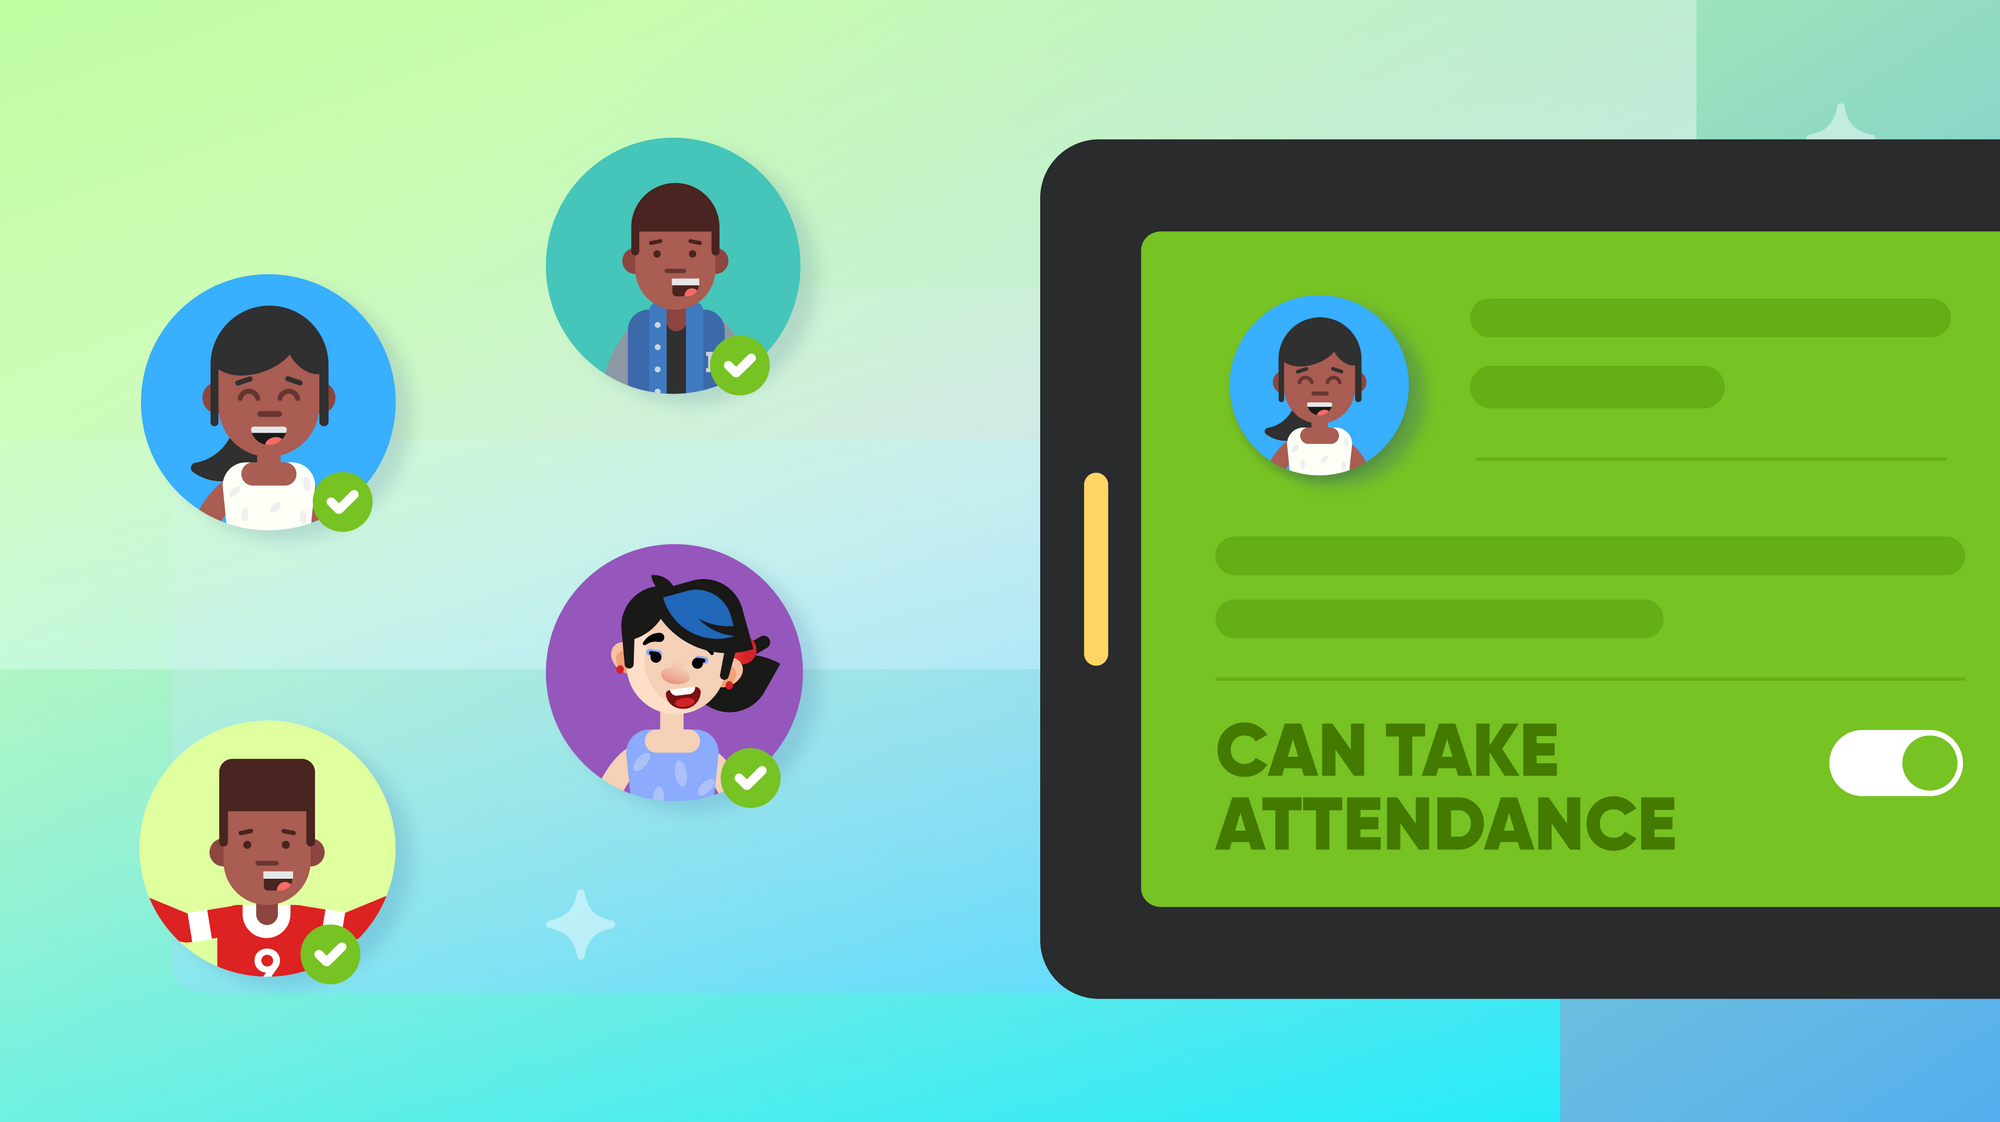 An iPad with a person's profile and a toggle enabling them to take attendance.